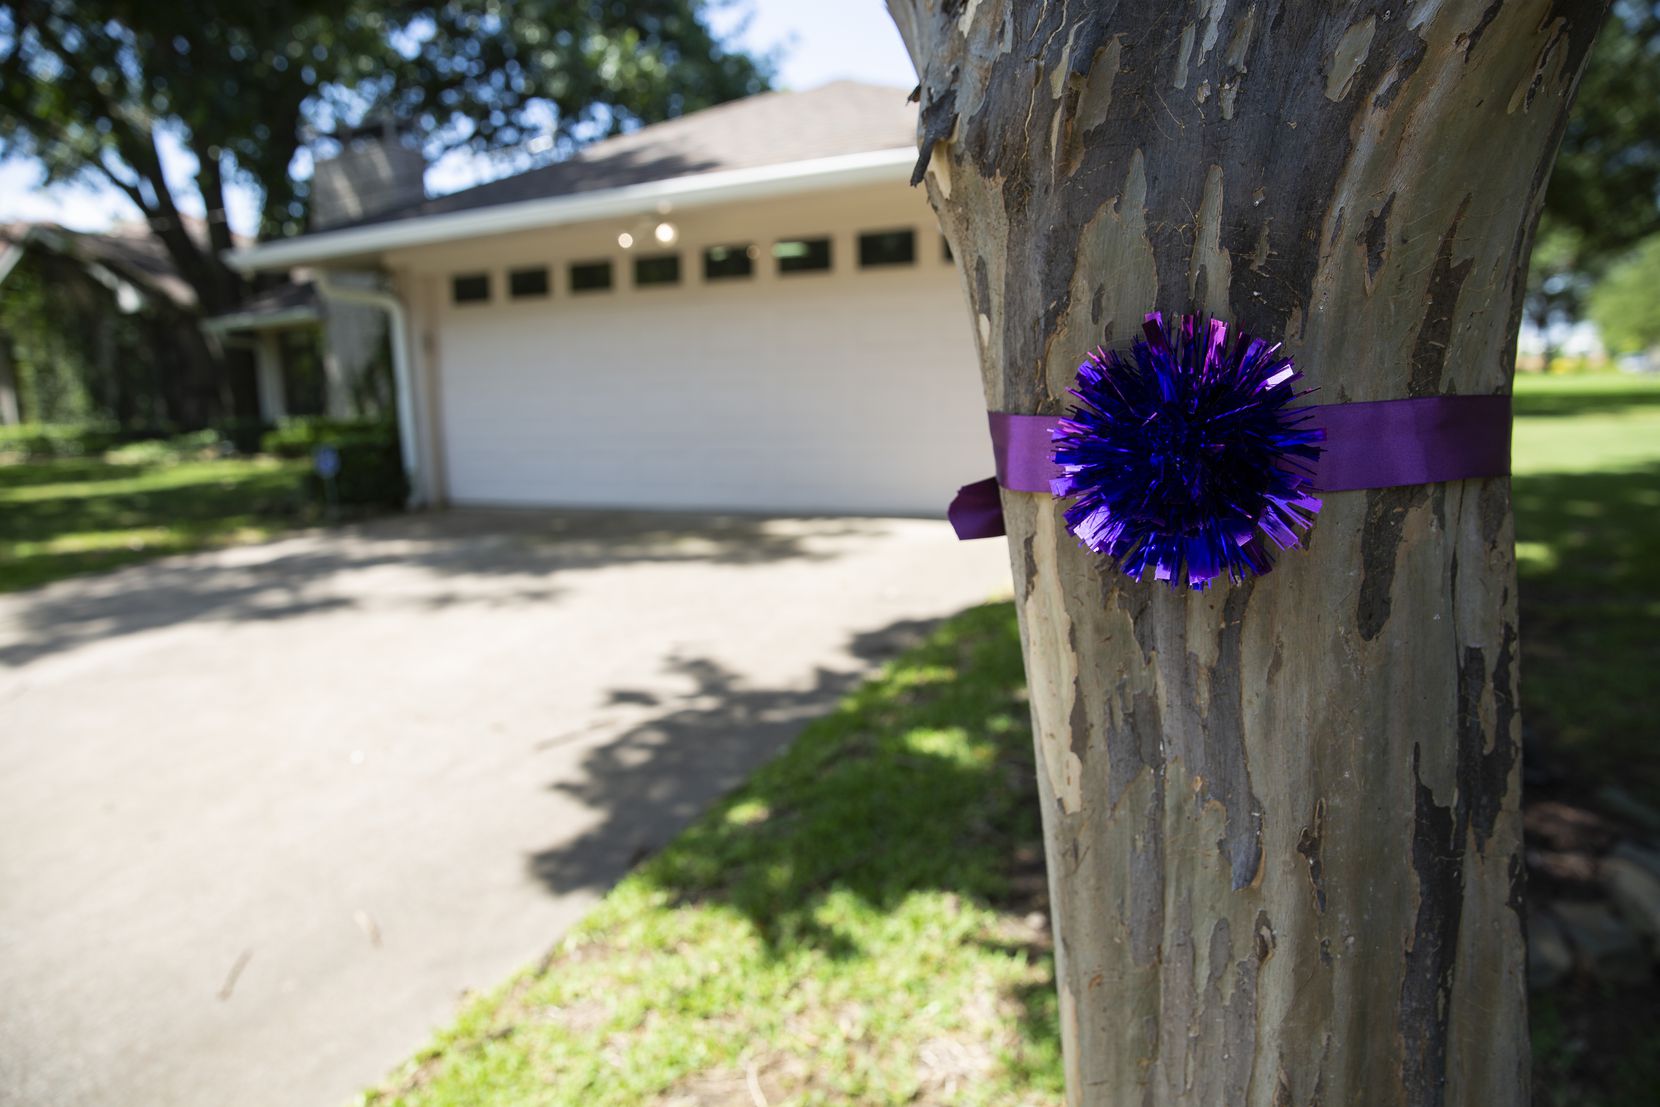 Neighbors have dressed the trees lining the Baker home with violet ribbons in honor of Leslie Baker's memory.